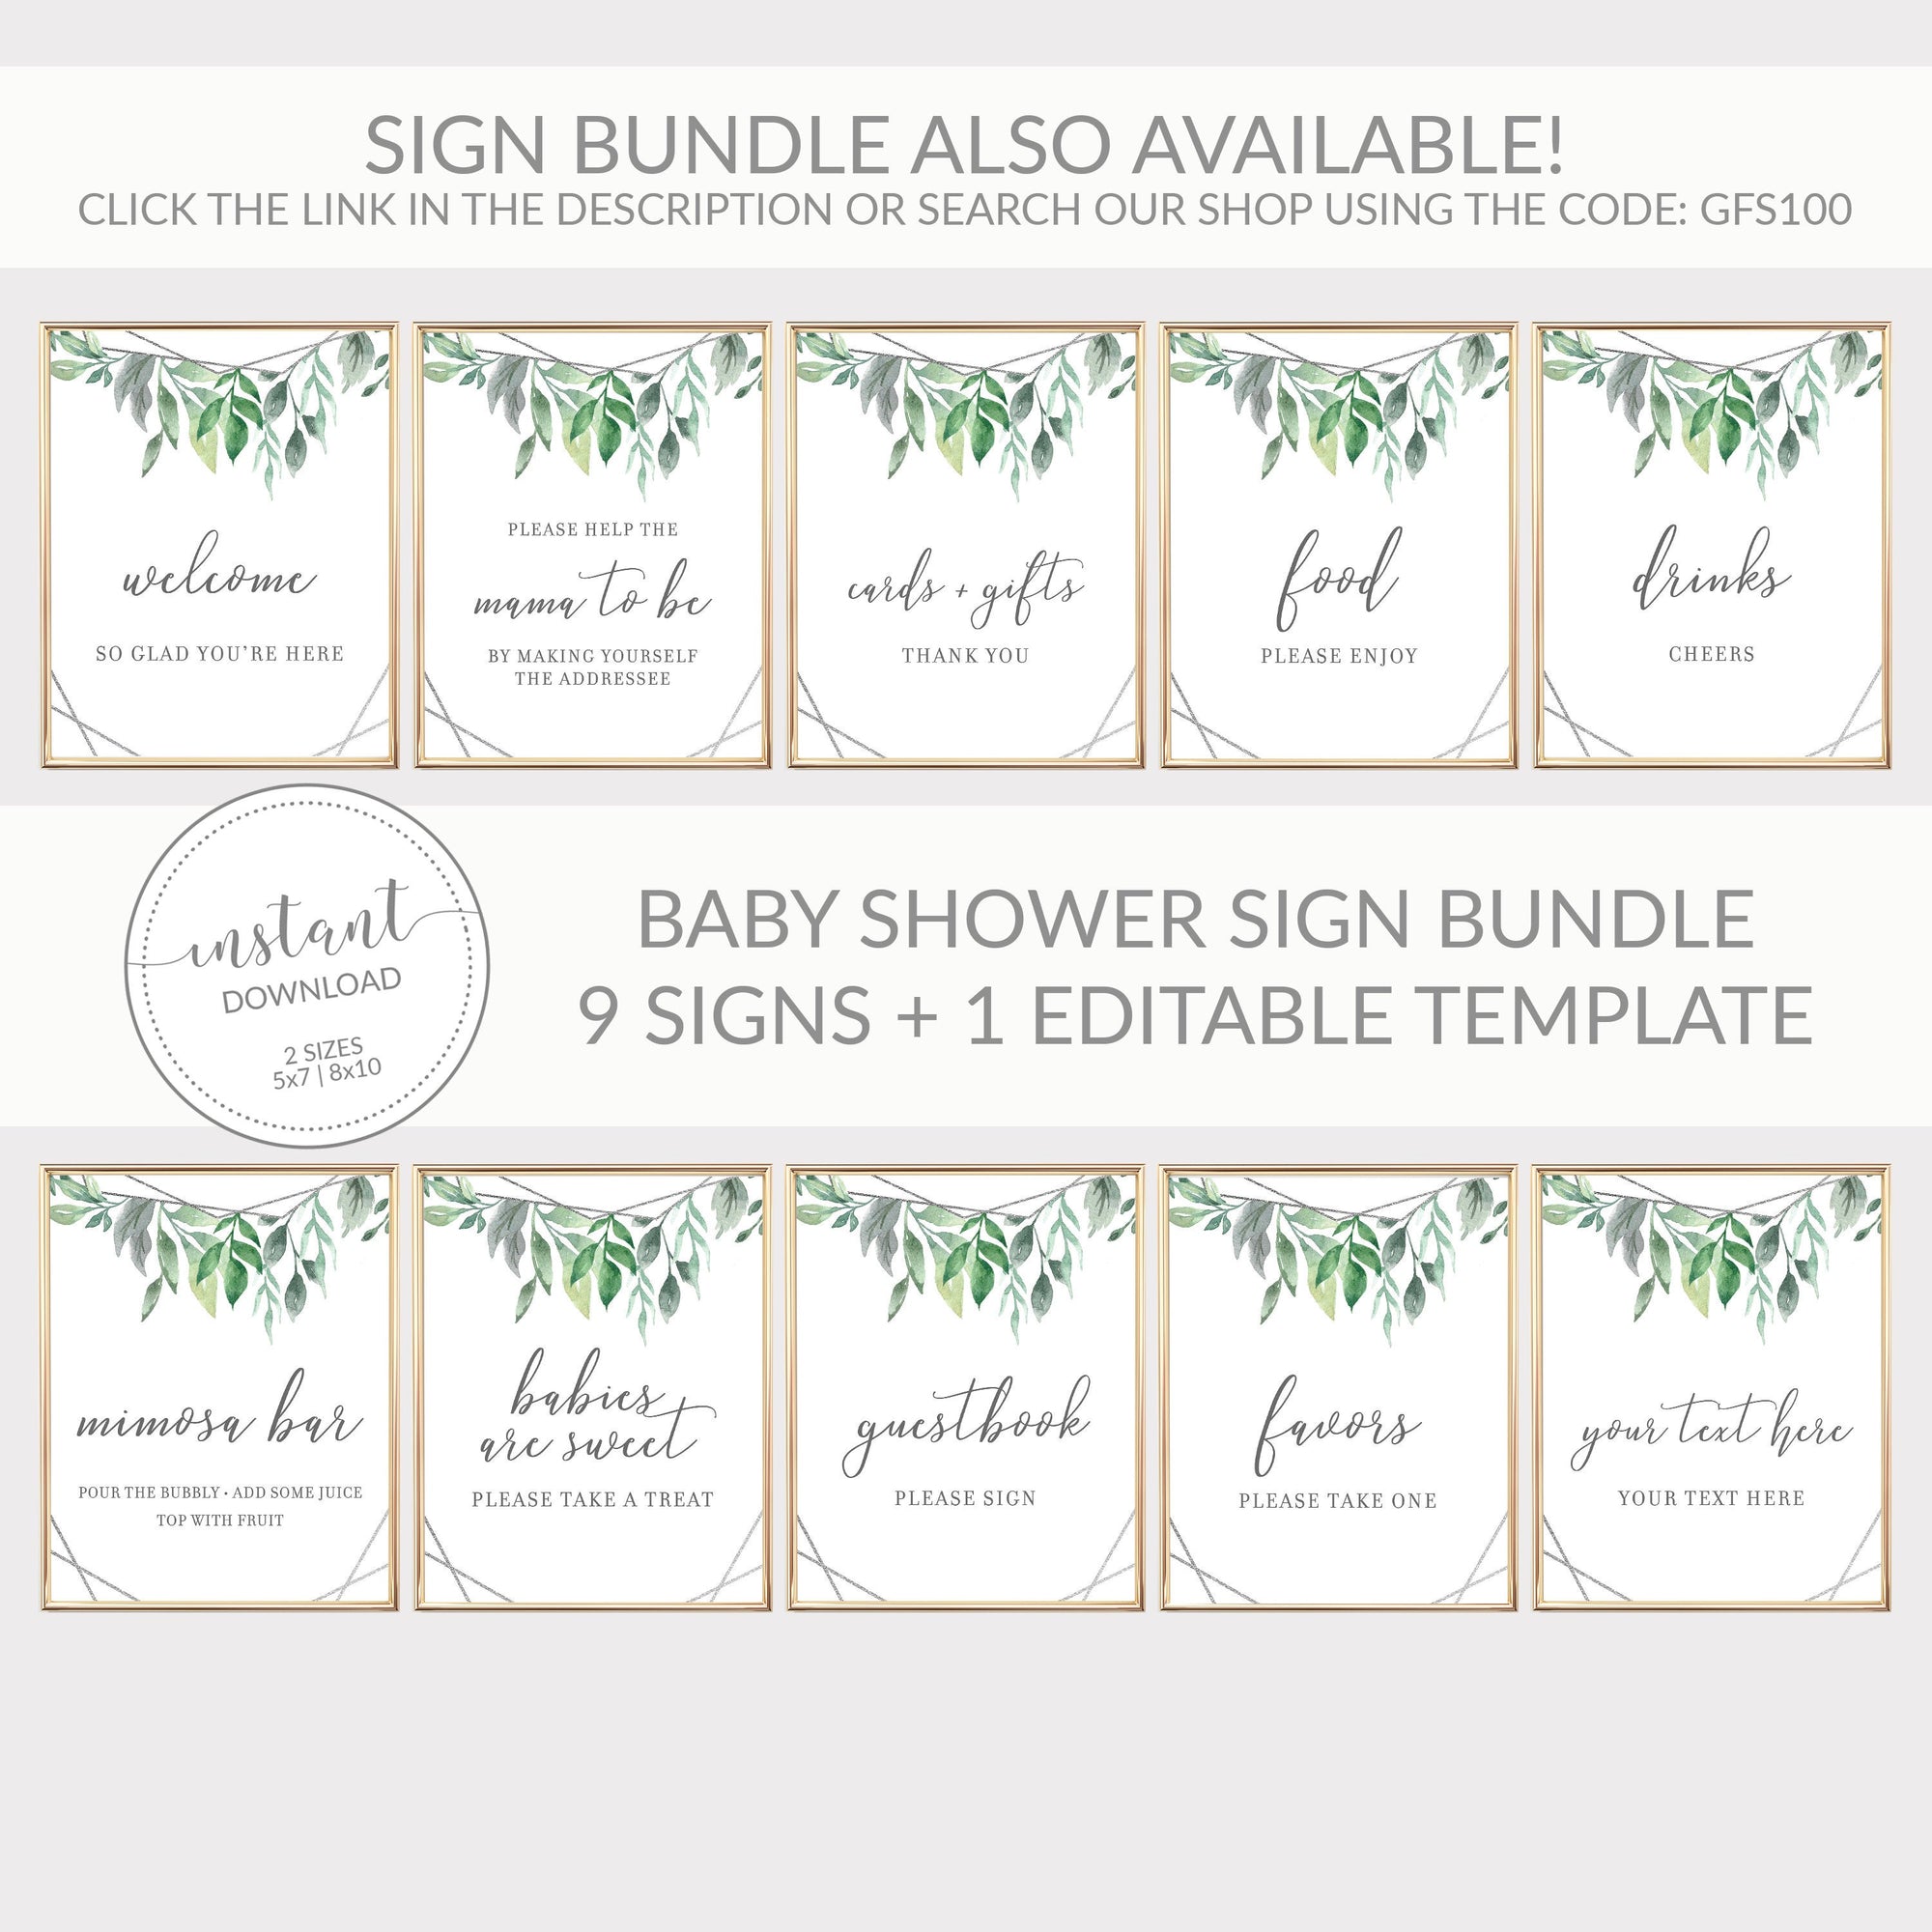 Geometric Silver Greenery Printable Favors Sign INSTANT DOWNLOAD, Birthday, Bridal Shower, Baby Shower, Wedding Decorations - GFS100 - @PlumPolkaDot 